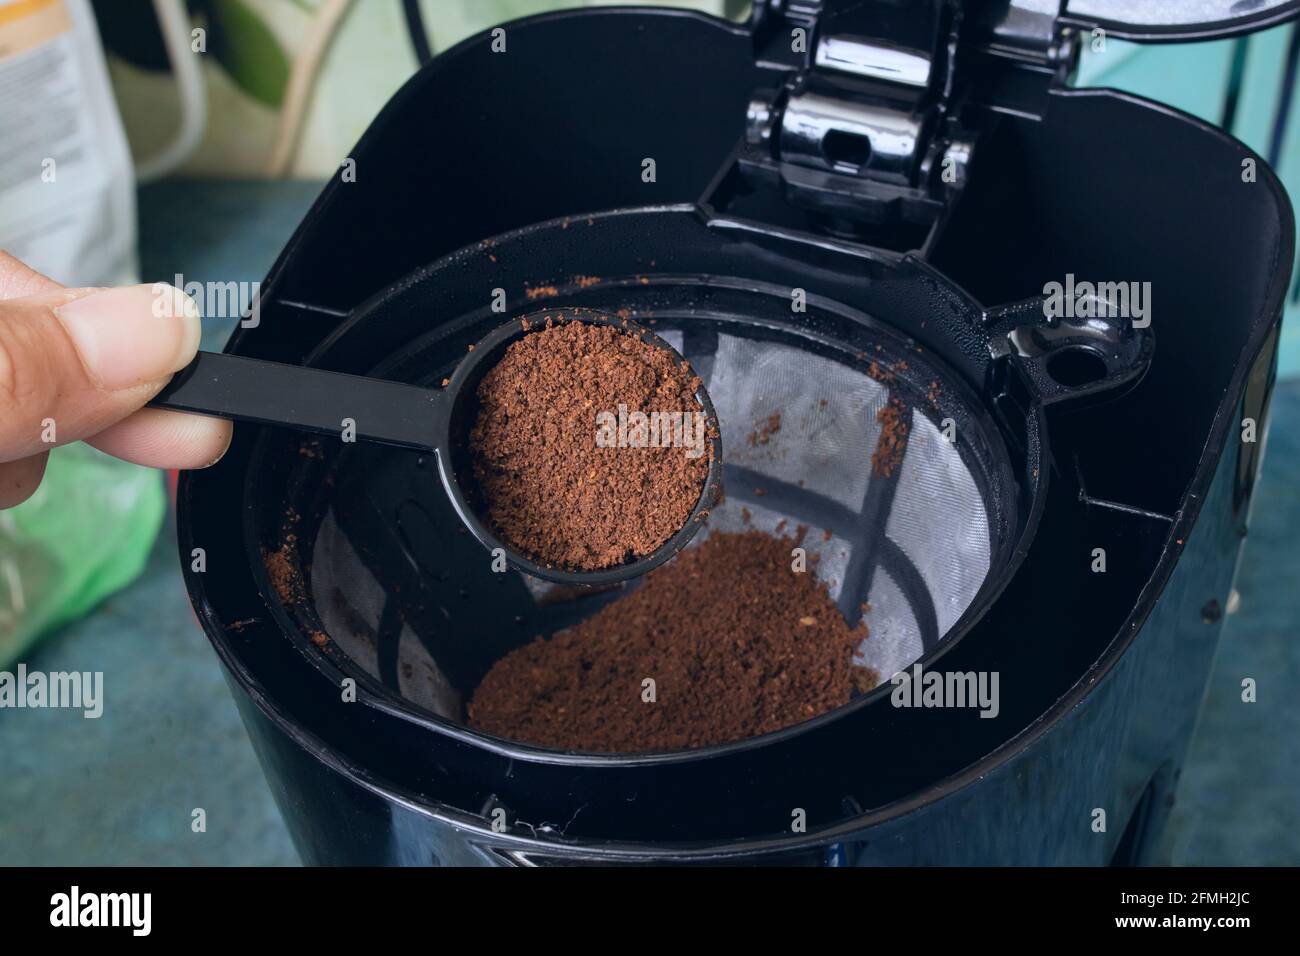 Spoon pours coffee into the container of the coffee maker close up Stock Photo